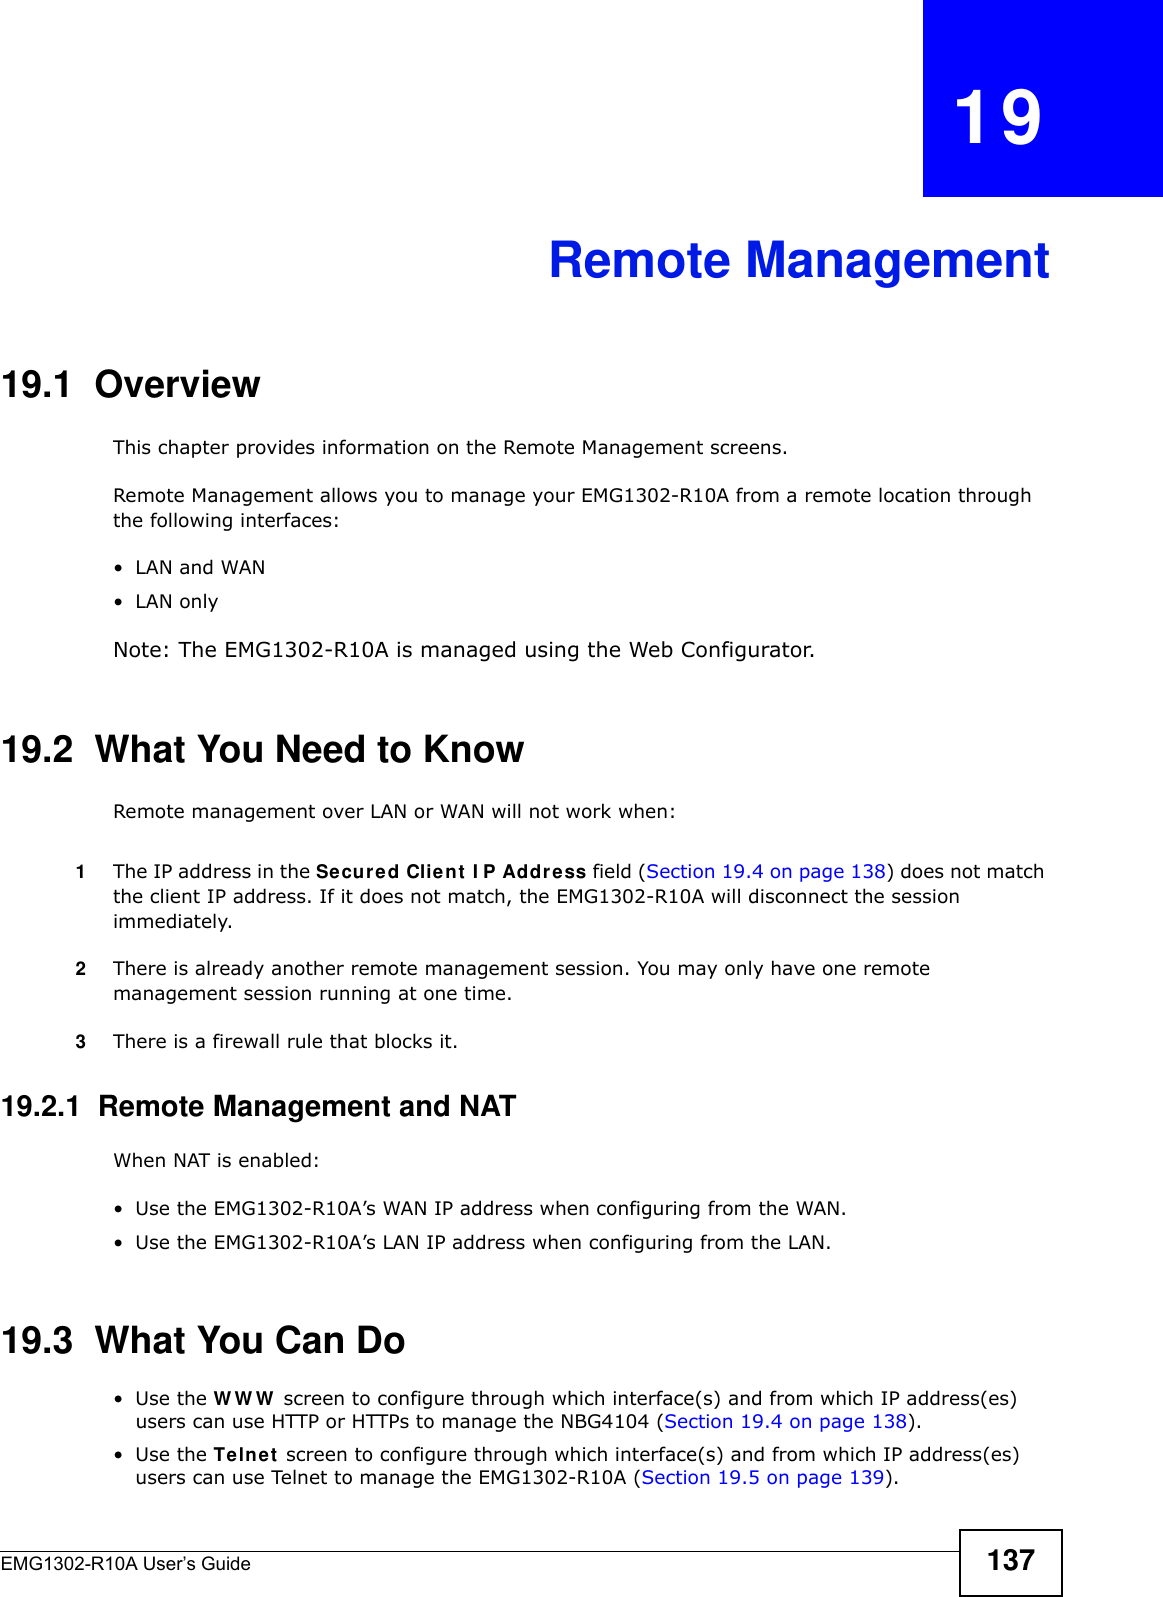 EMG1302-R10A User’s Guide 137CHAPTER   19Remote Management19.1  OverviewThis chapter provides information on the Remote Management screens. Remote Management allows you to manage your EMG1302-R10A from a remote location through the following interfaces:•LAN and WAN•LAN onlyNote: The EMG1302-R10A is managed using the Web Configurator.19.2  What You Need to KnowRemote management over LAN or WAN will not work when:1The IP address in the Secured Clie n t  I P Addre ss field (Section 19.4 on page 138) does not match the client IP address. If it does not match, the EMG1302-R10A will disconnect the session immediately.2There is already another remote management session. You may only have one remote management session running at one time.3There is a firewall rule that blocks it.19.2.1  Remote Management and NATWhen NAT is enabled:• Use the EMG1302-R10A’s WAN IP address when configuring from the WAN.• Use the EMG1302-R10A’s LAN IP address when configuring from the LAN.19.3  What You Can Do•Use the WWW screen to configure through which interface(s) and from which IP address(es) users can use HTTP or HTTPs to manage the NBG4104 (Section 19.4 on page 138).•Use the Te lnet  screen to configure through which interface(s) and from which IP address(es) users can use Telnet to manage the EMG1302-R10A (Section 19.5 on page 139).